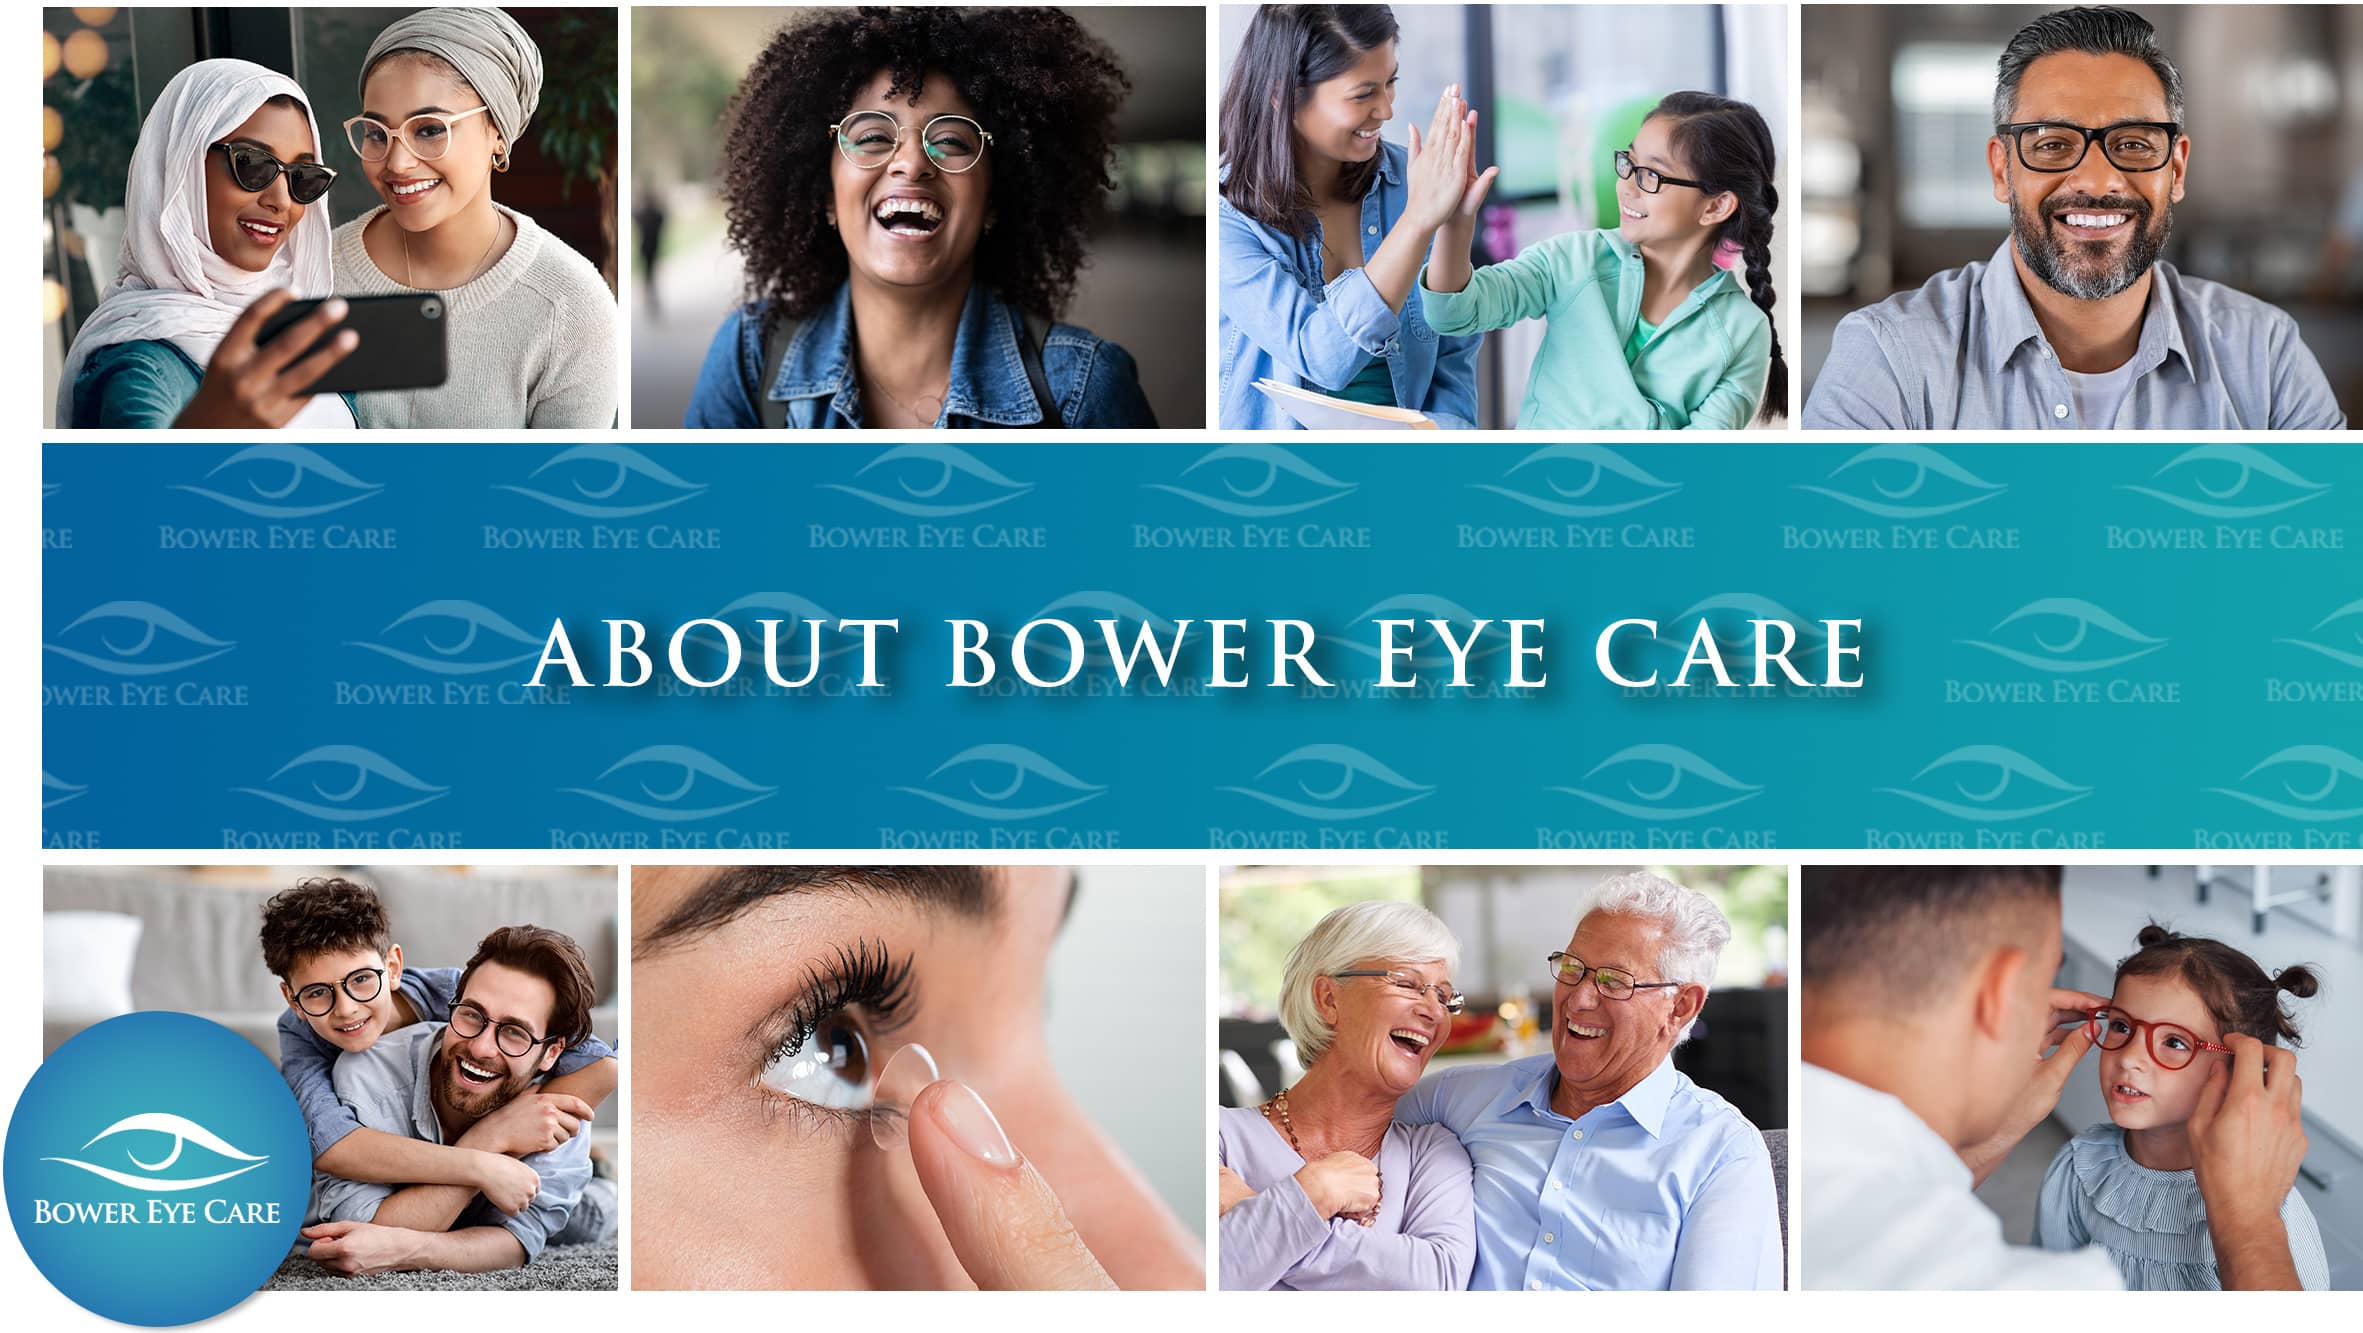 About Bower Eye Care
